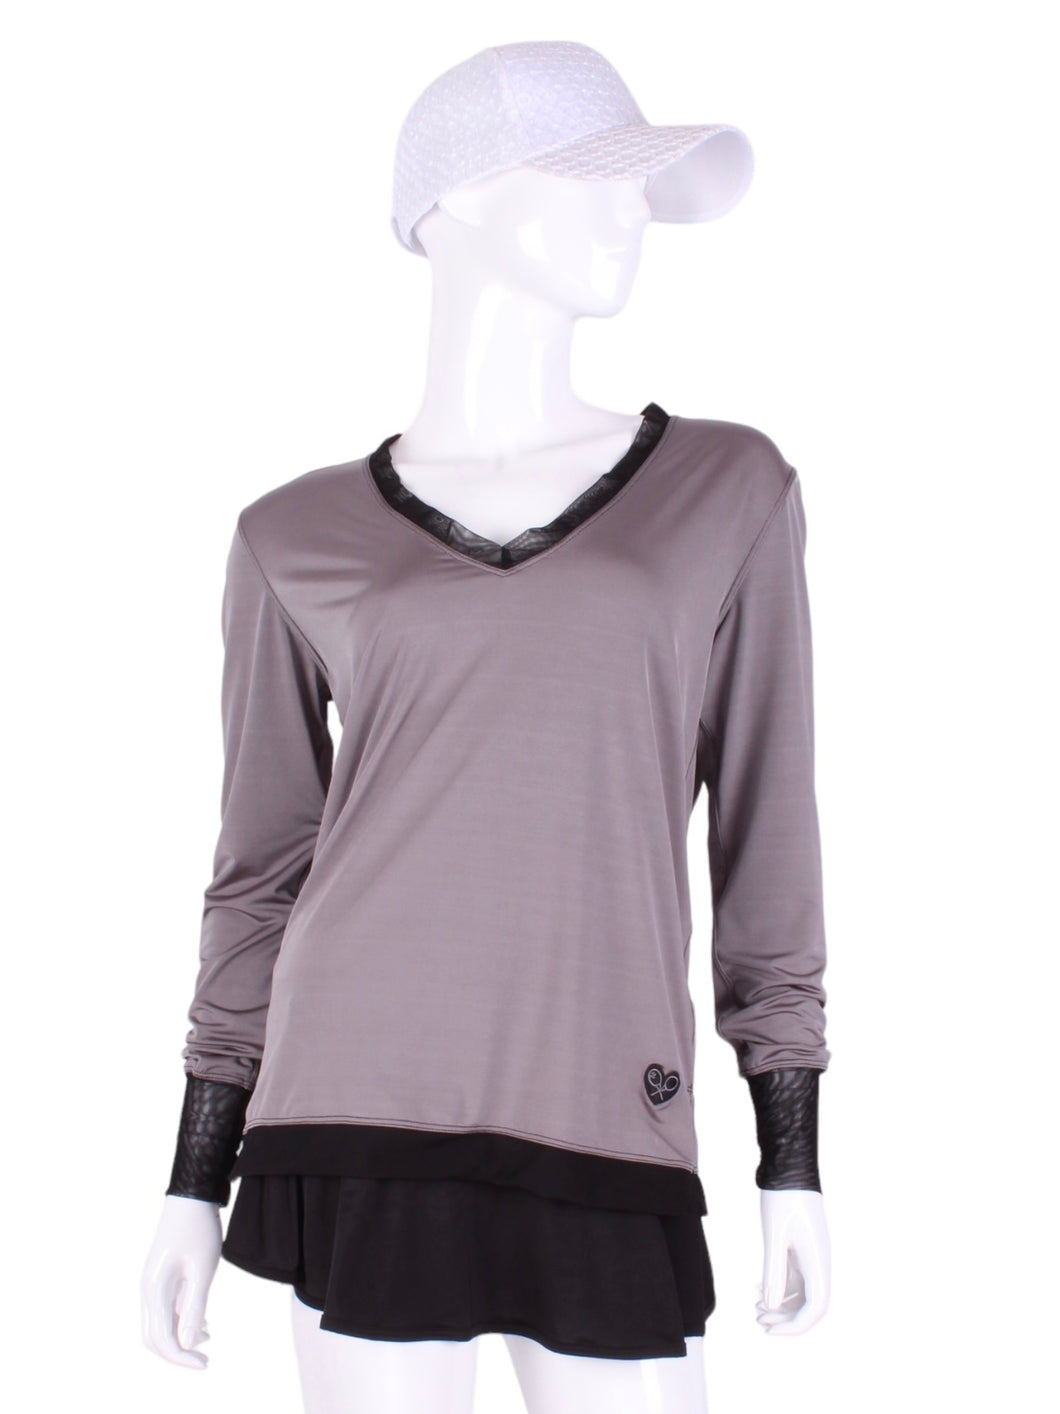 Grey Long Sleeve Very Vee Tee w/ Black Mesh. For the tennis lady who loves to leave her chest open - but cover her arms (and other bits) this top is seductive in a sweet way!  You feel nearly naked in it.  So go ahead - hit that ace!  Flattering and free - that’s what this top is.  The most preppy of my tops - looks just as good tied around the shoulders as it does on! 